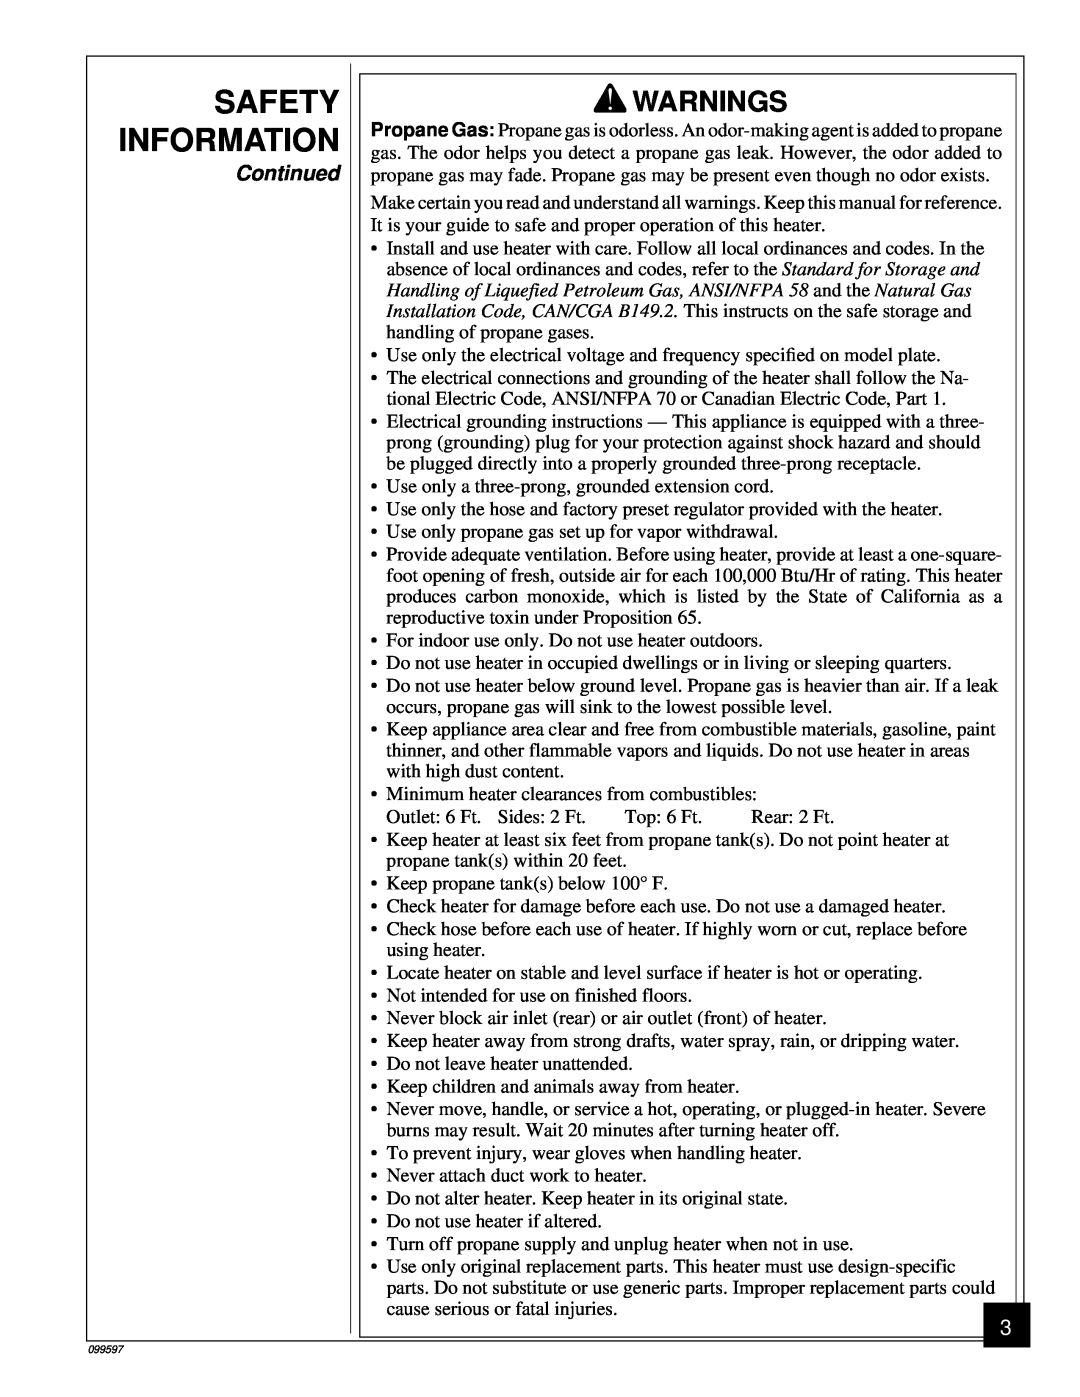 Homelite HP35 owner manual Safety Information, Warnings, Continued 